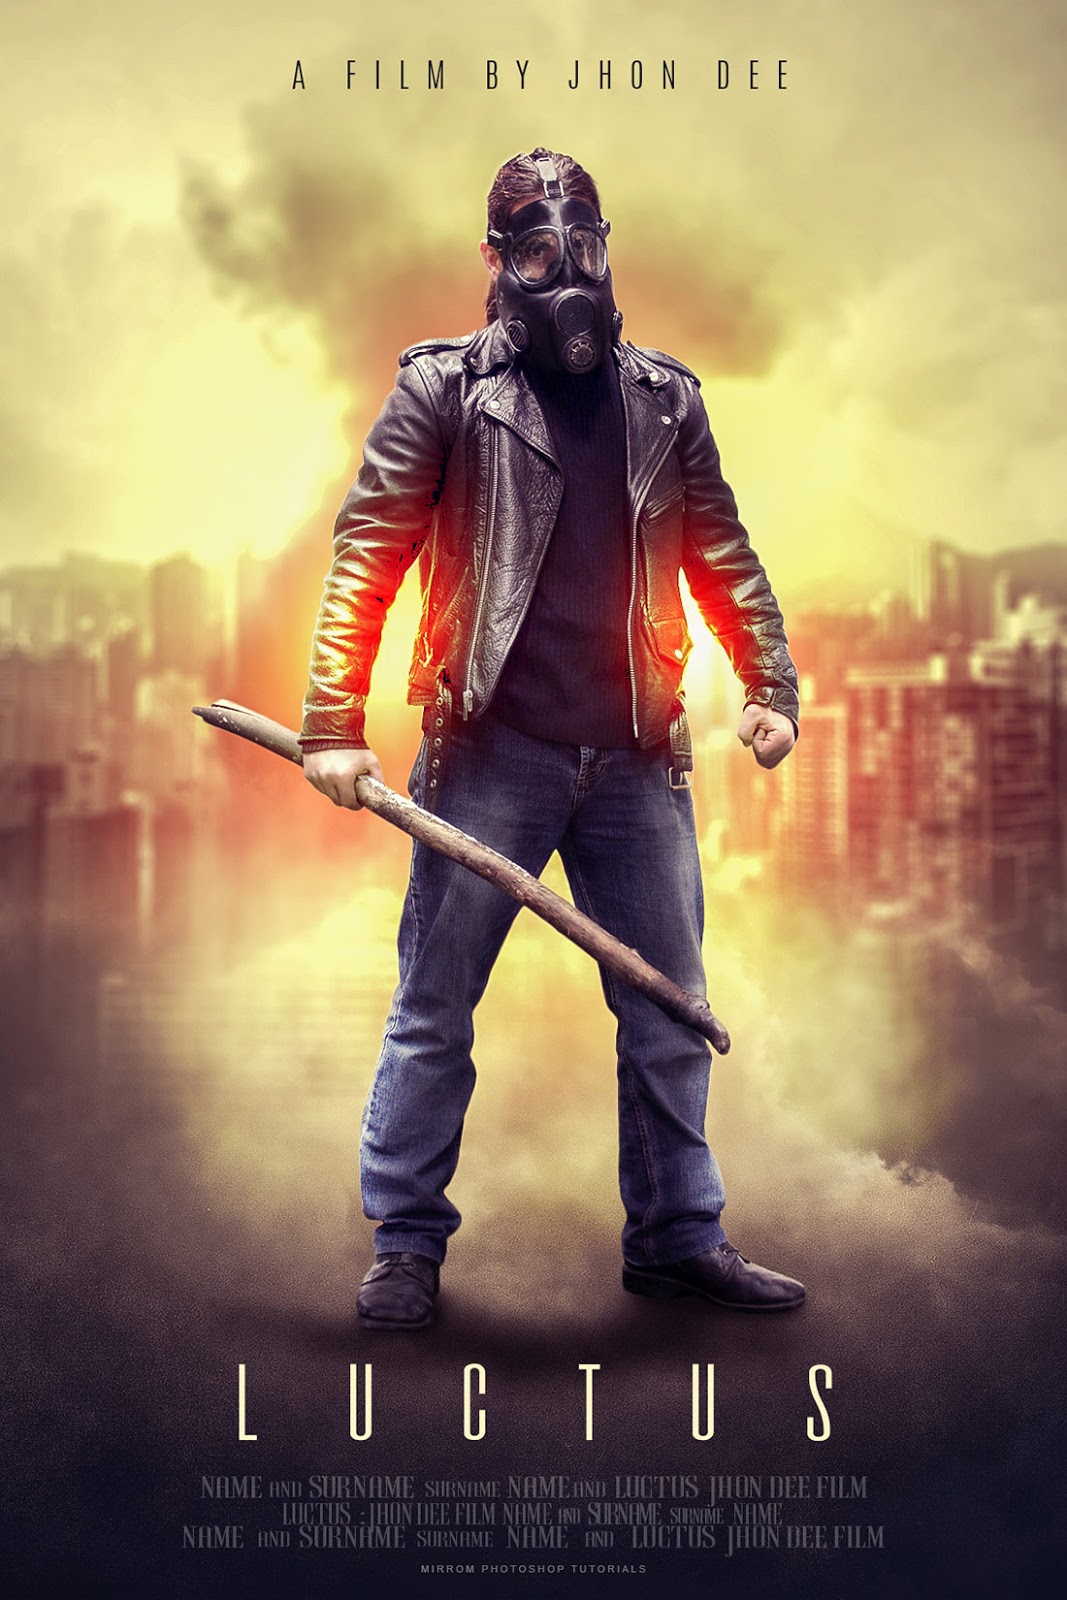 Creating a Movie Poster Manipulation Effects in Photoshop CC